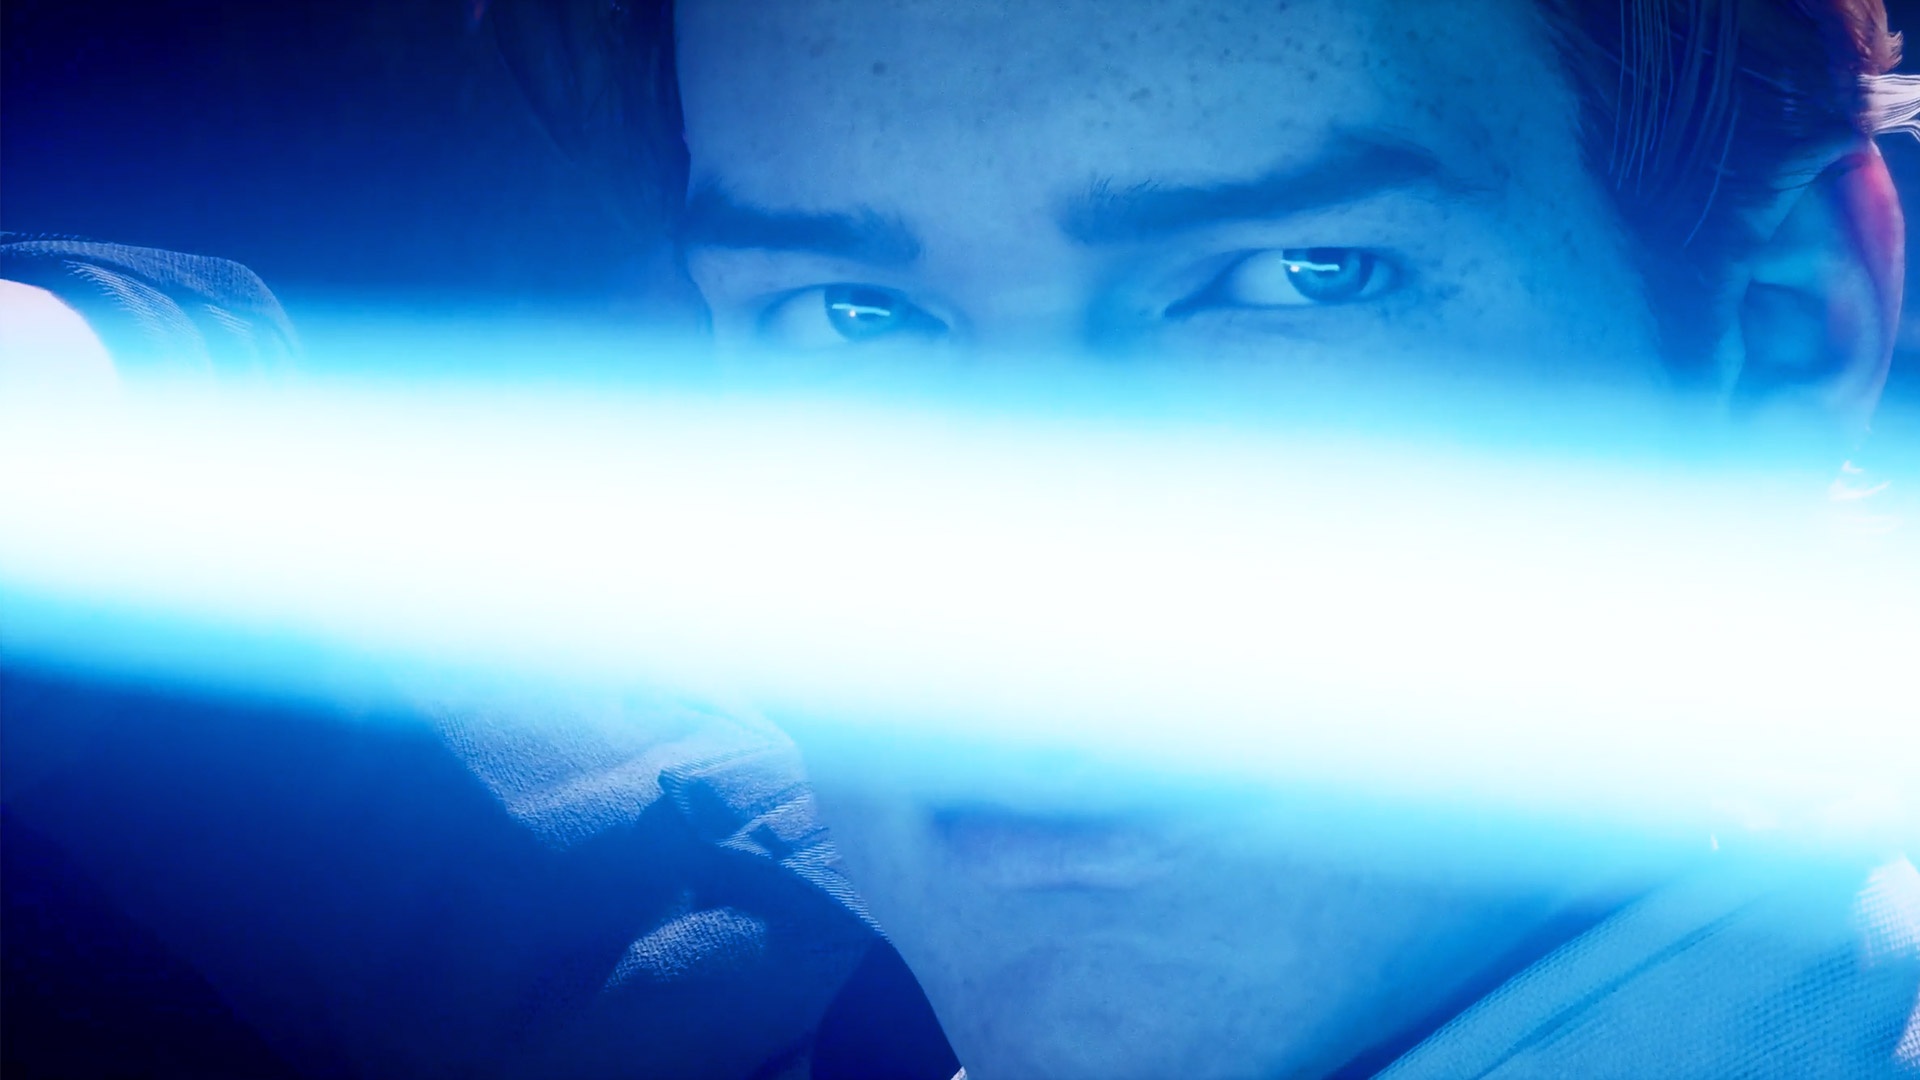 E3 2019: EA Unleashes the Force Powers and Fluid Combat of Star Wars Jedi: Fallen Order